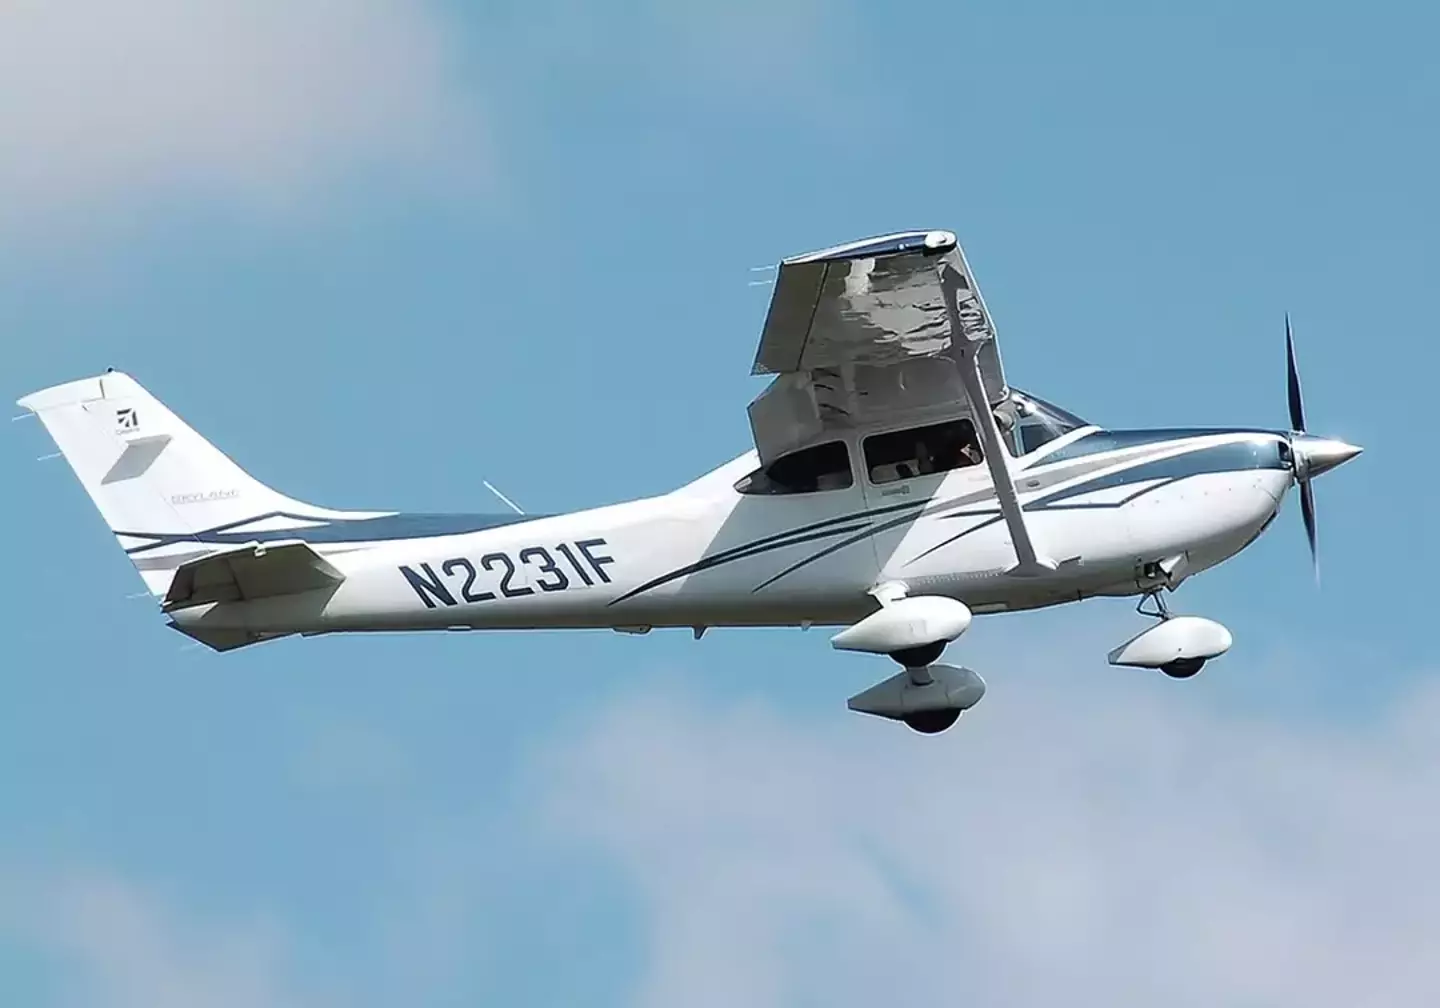 A Cessna light aircraft similar to the one Valentich was flying. (Arpingstone / Wiki)